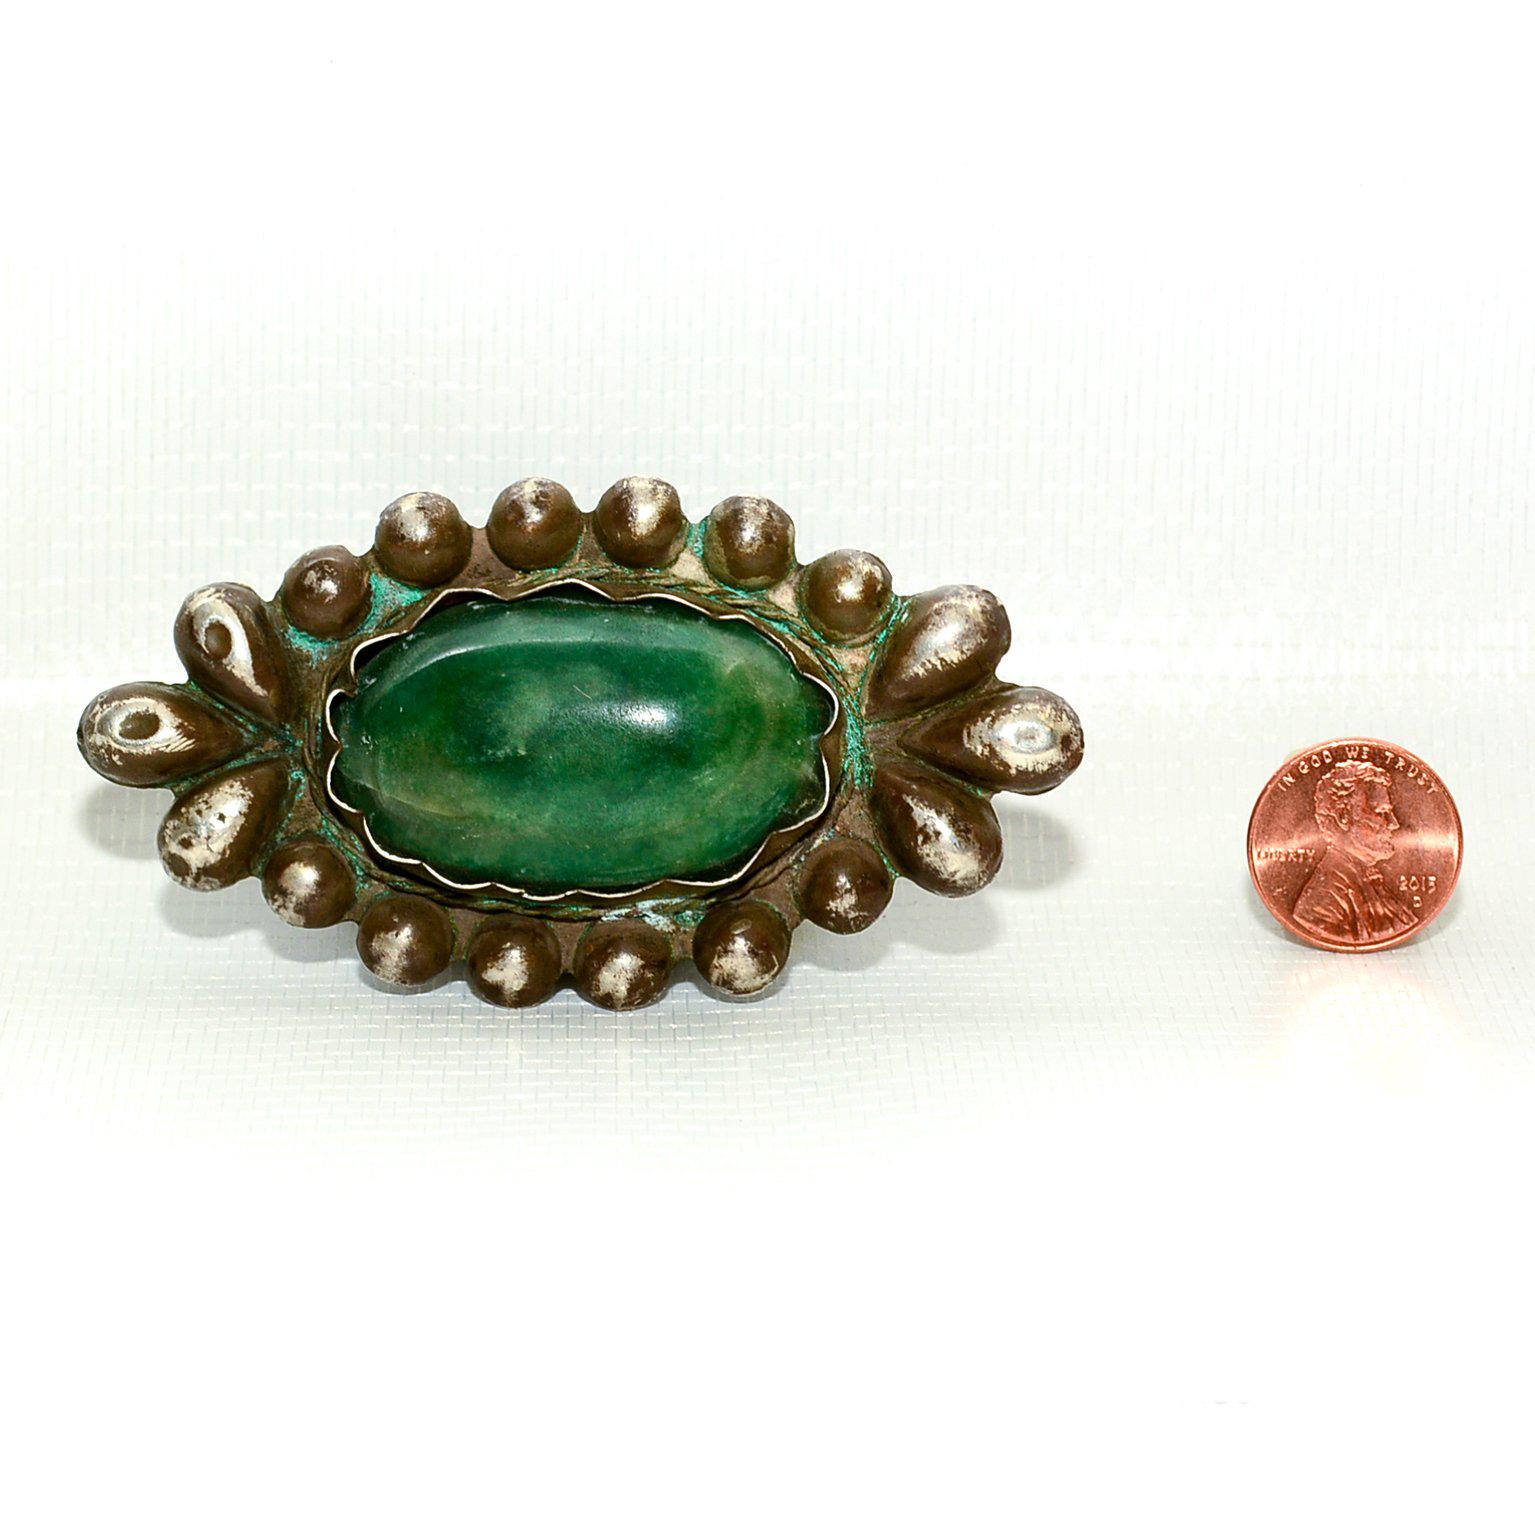 Rare William Spratling Brooch Sterling Silver with Mexican Cabochon Jade 4